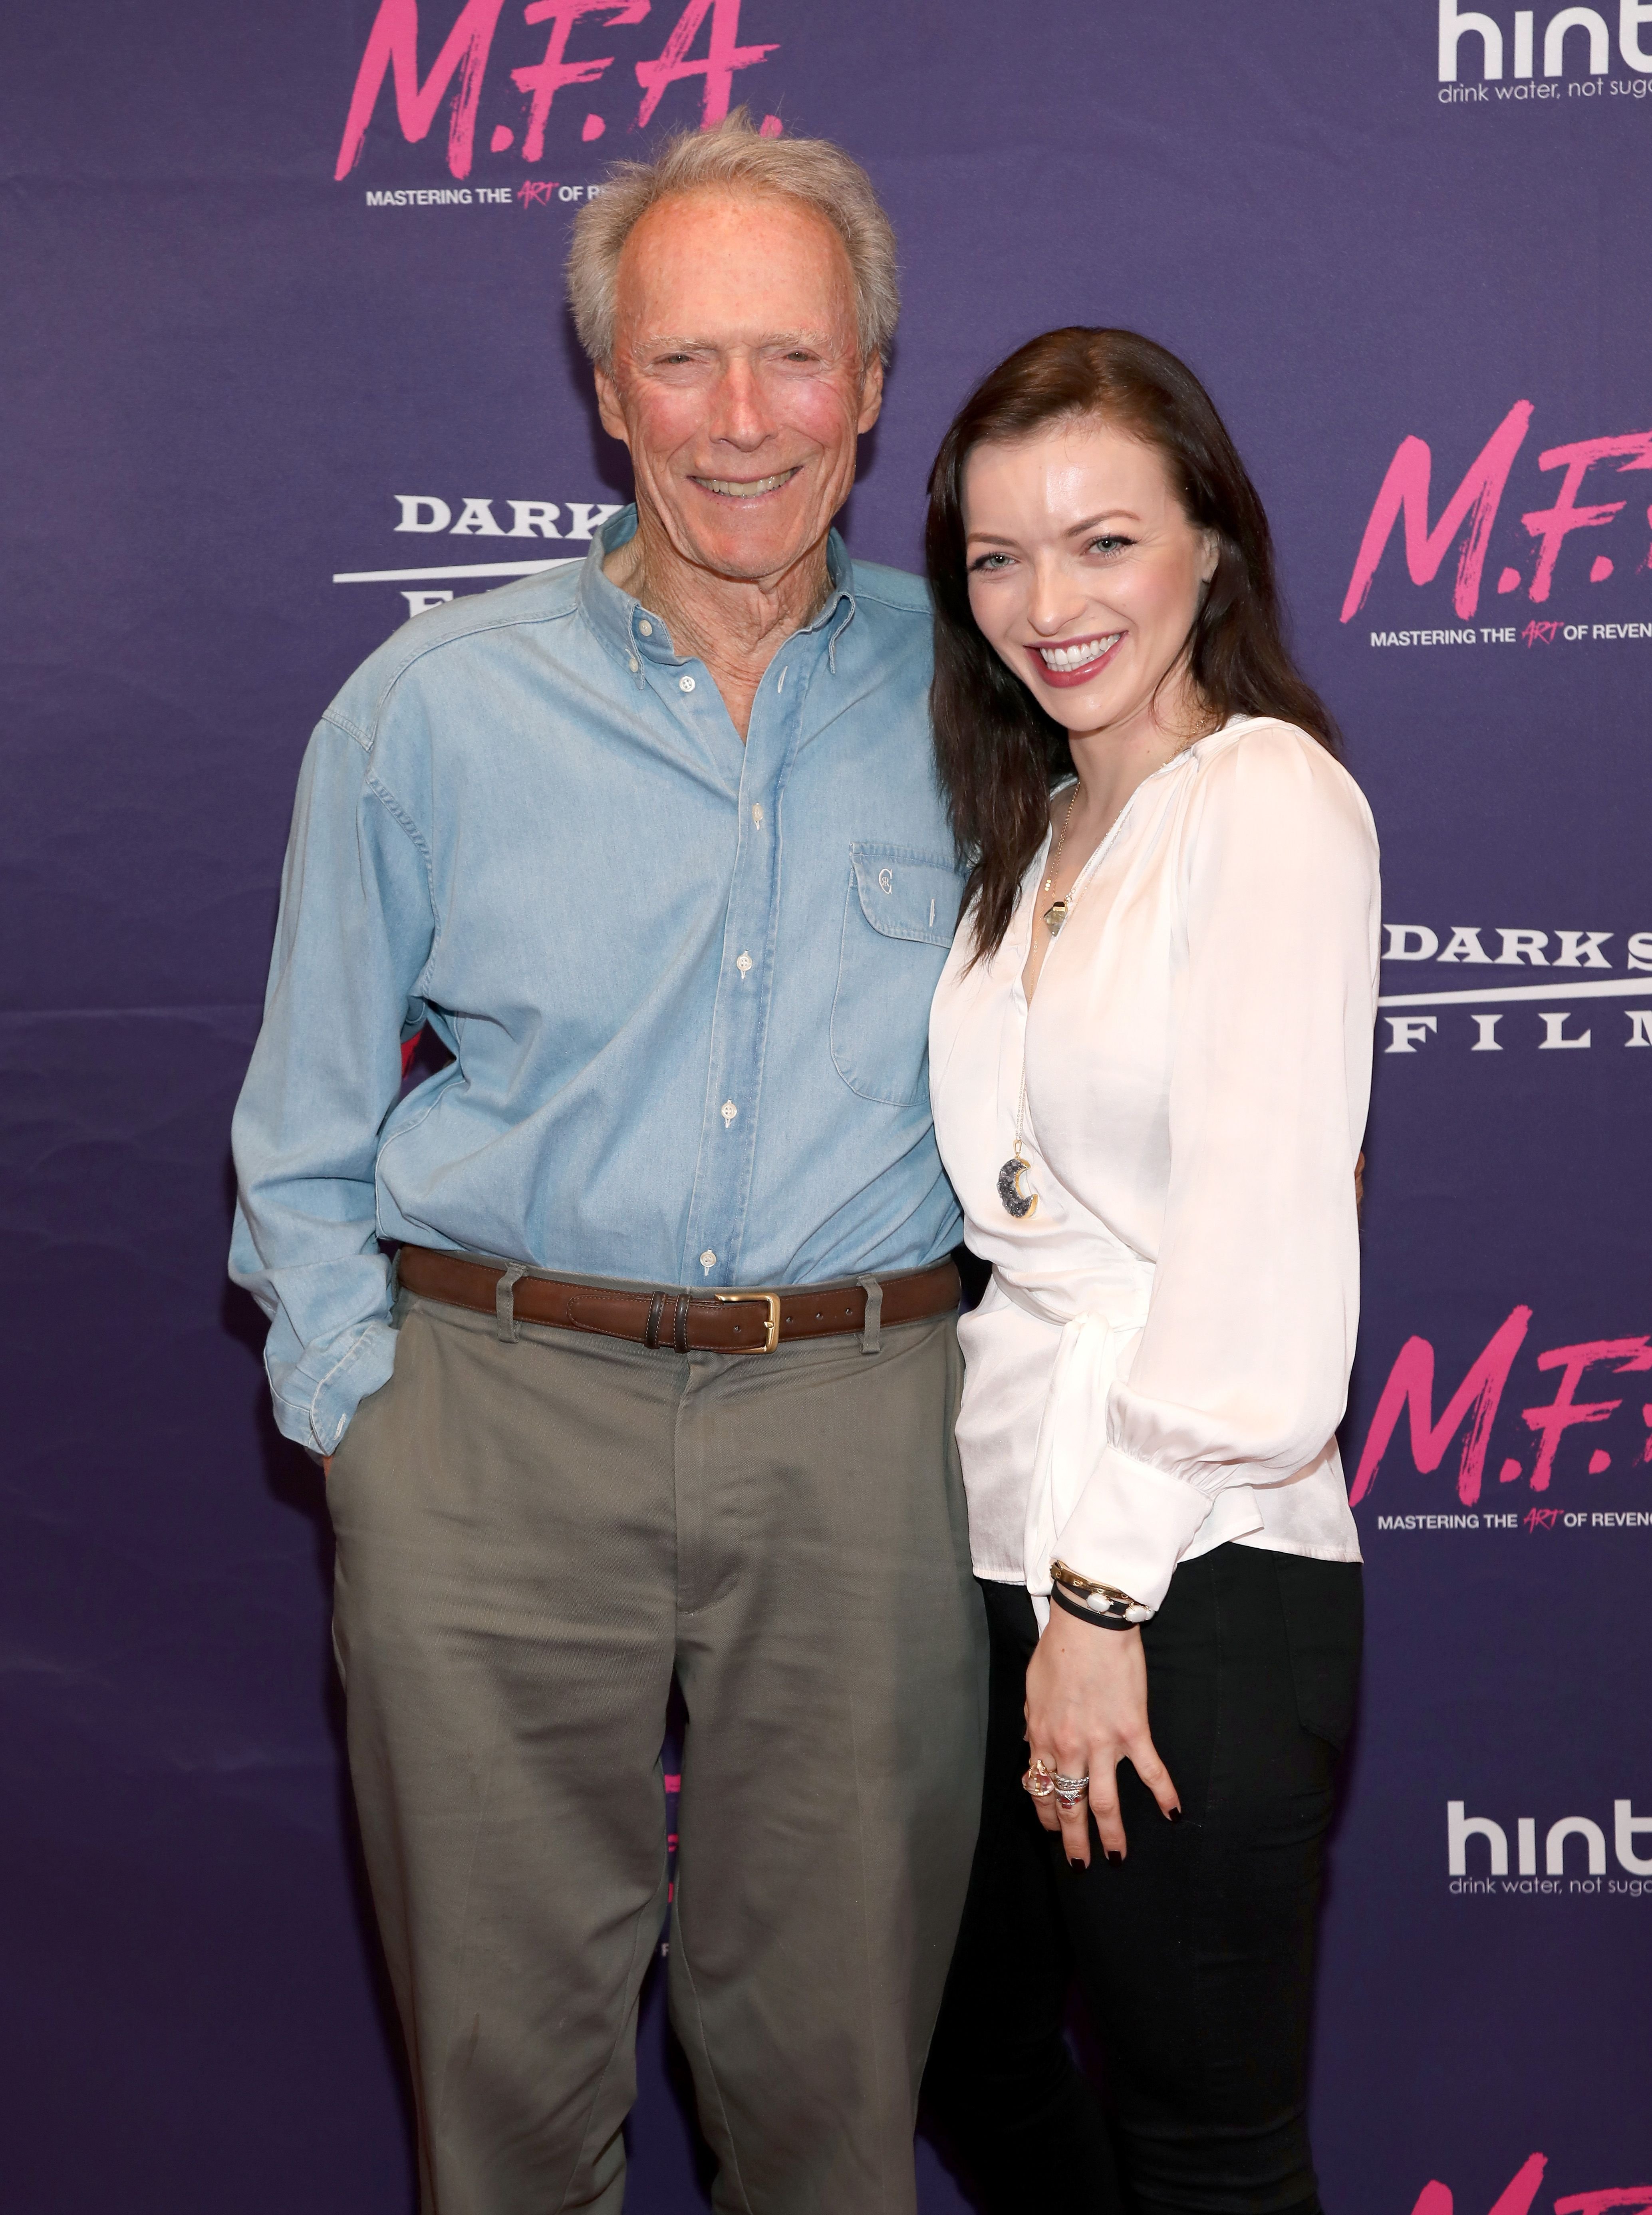 Actor/Director Clint Eastwood poses with his daughter/actress Francesca Eastwood at the Premiere Of Dark Sky Films' "M.F.A." at The London West Hollywood on October 2, 2017 | Photo Getty Images